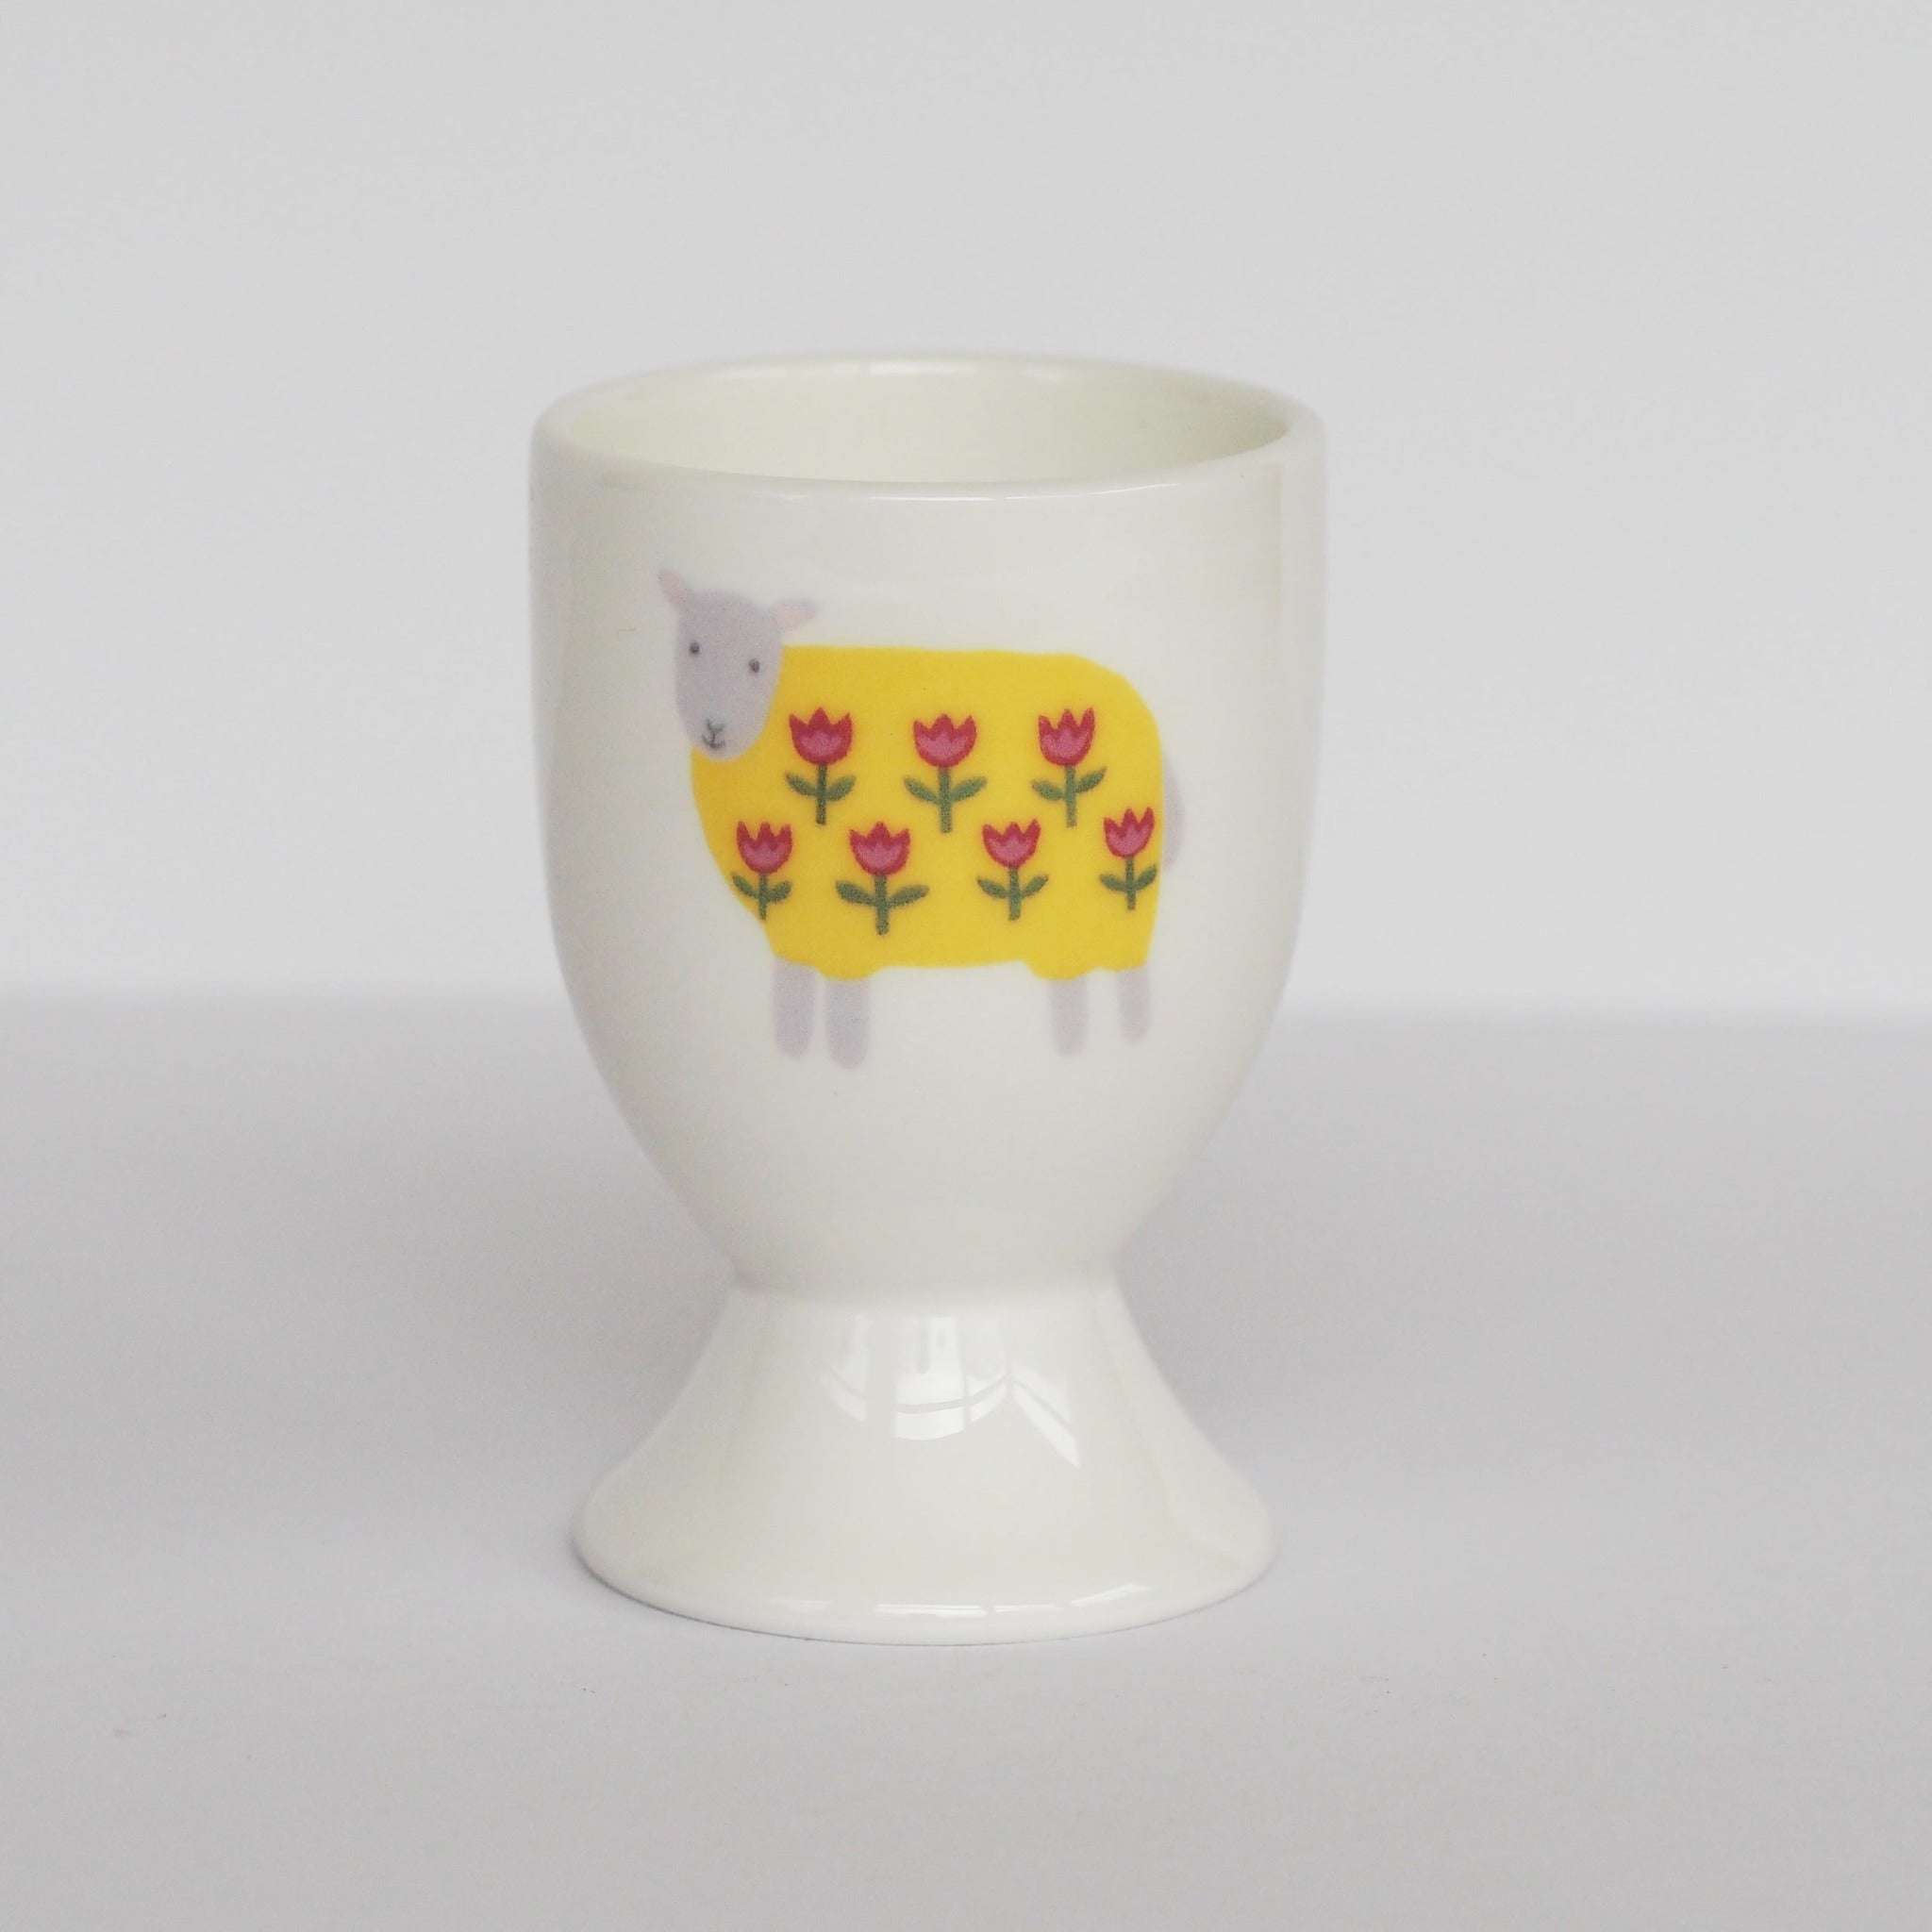 Yellow Sheep Egg Cup by Mary Kilvert